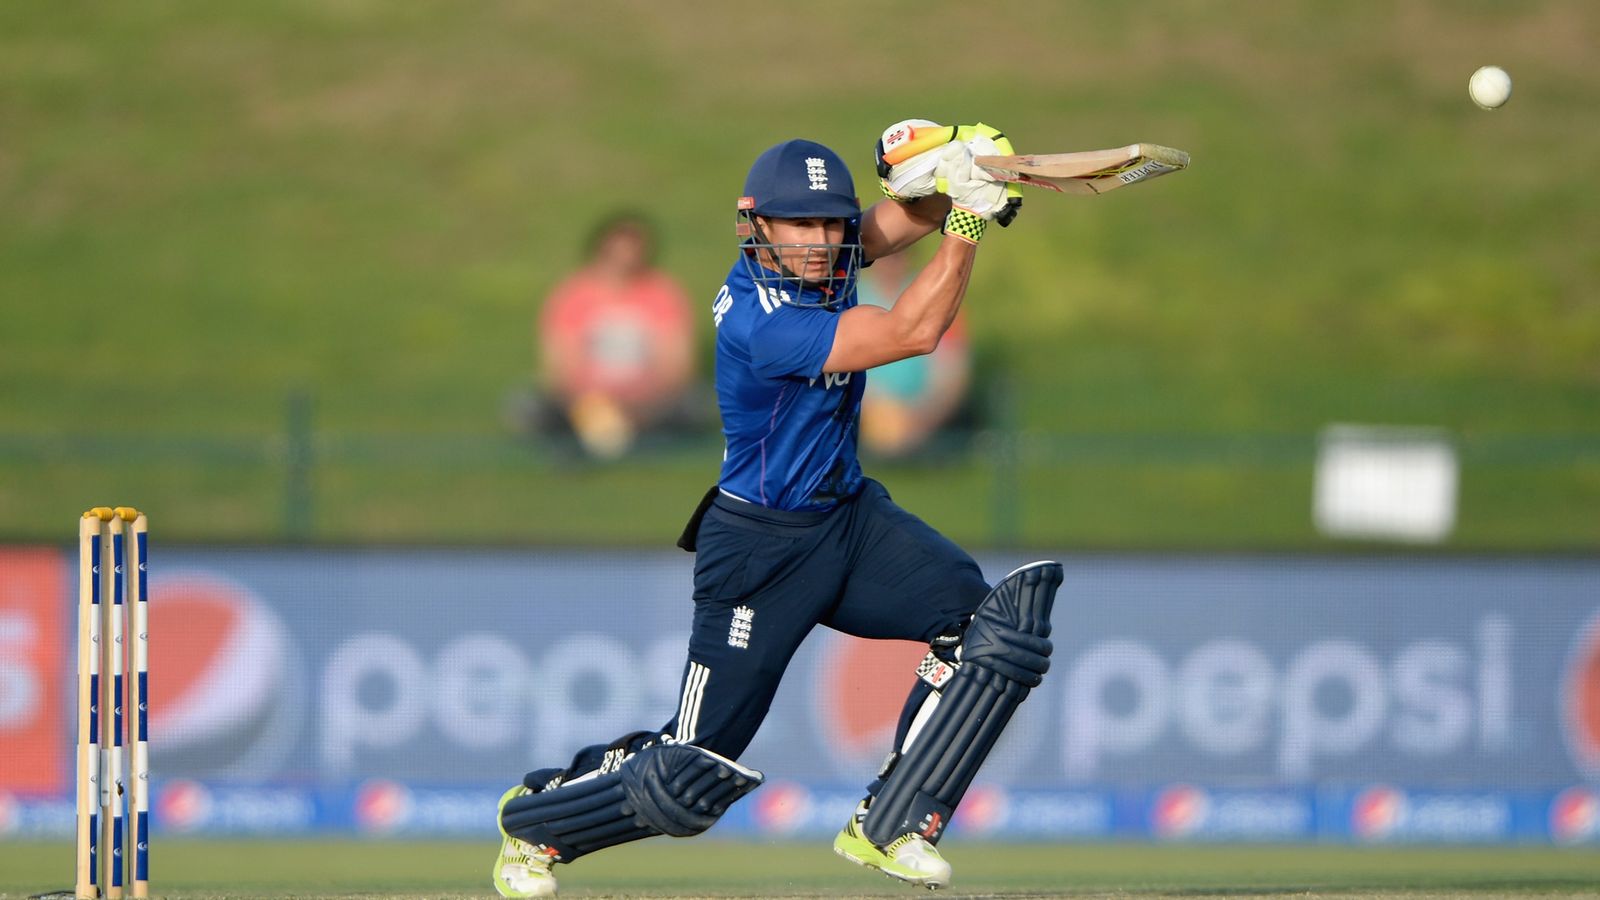 James Taylor praises England's spin defence ahead of third ODI against